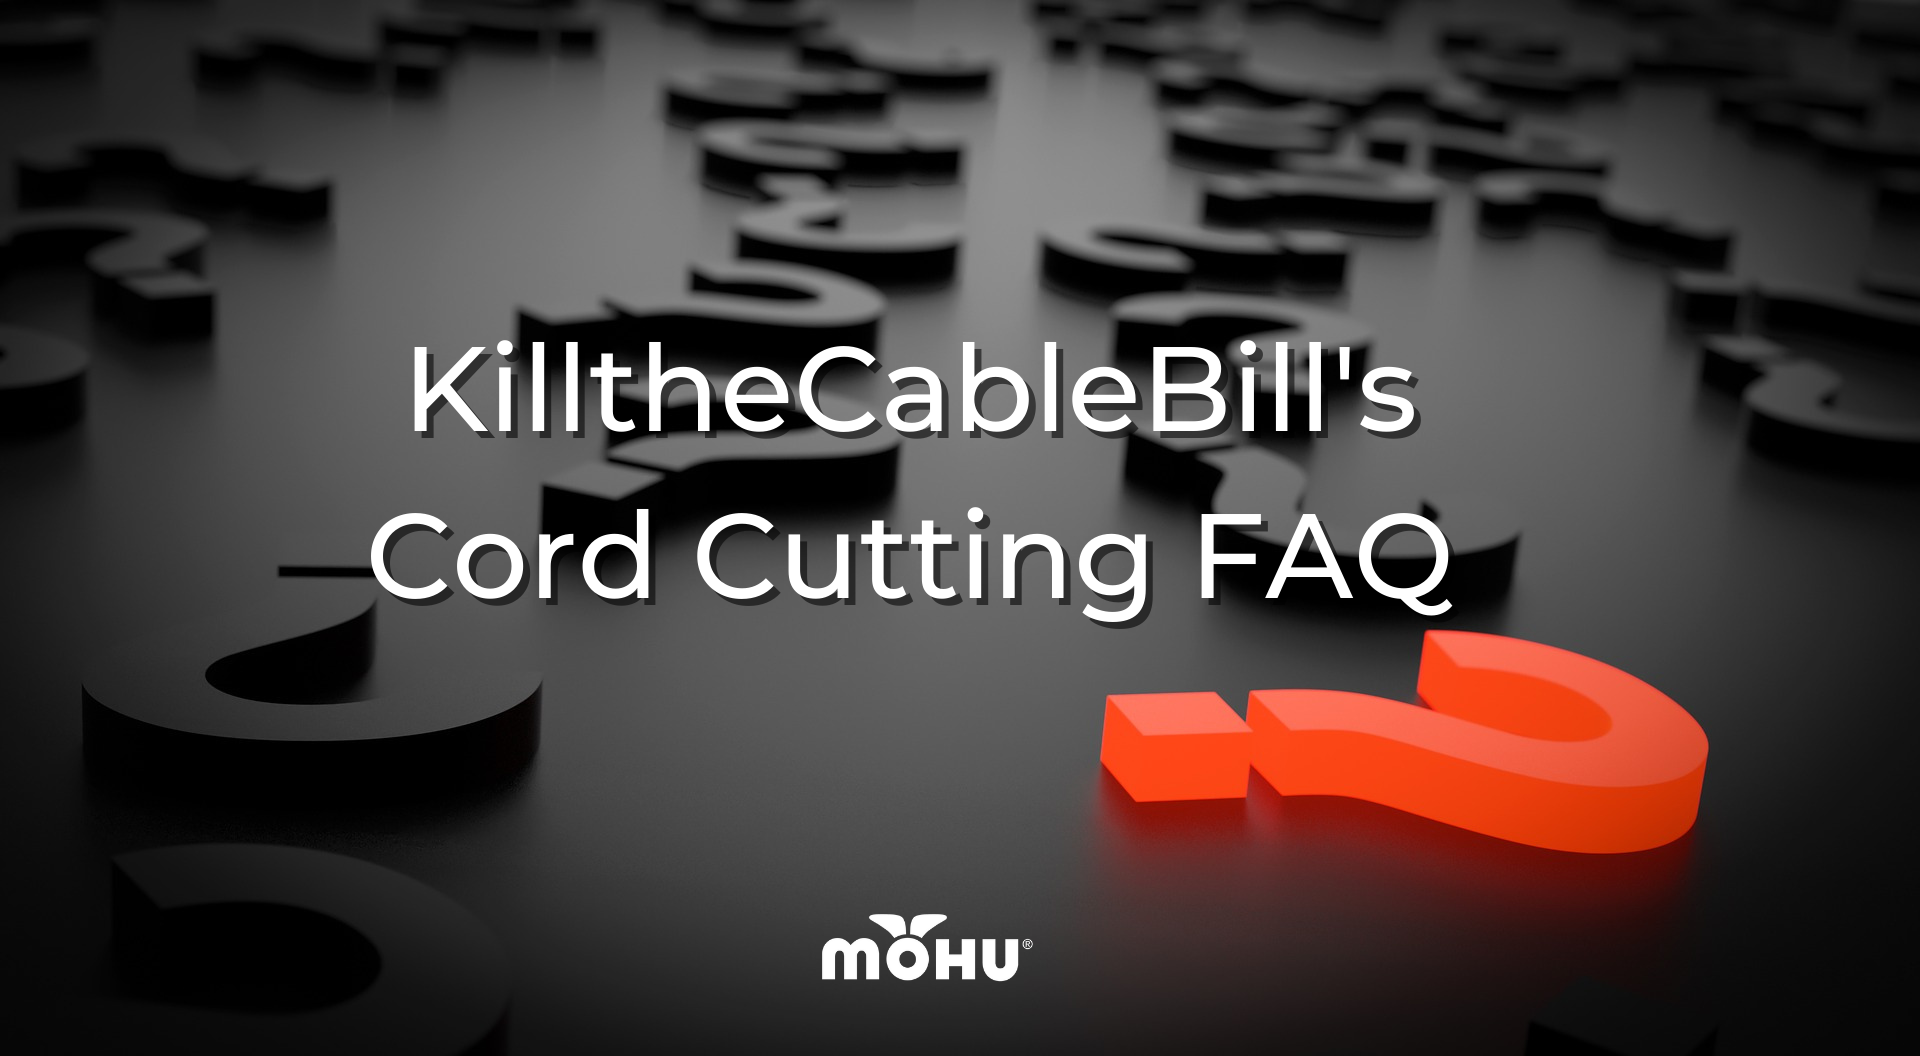 Bunch of Question Marks on a dark background, KilltheCableBill's Cord Cutting FAQ, Mohu logo